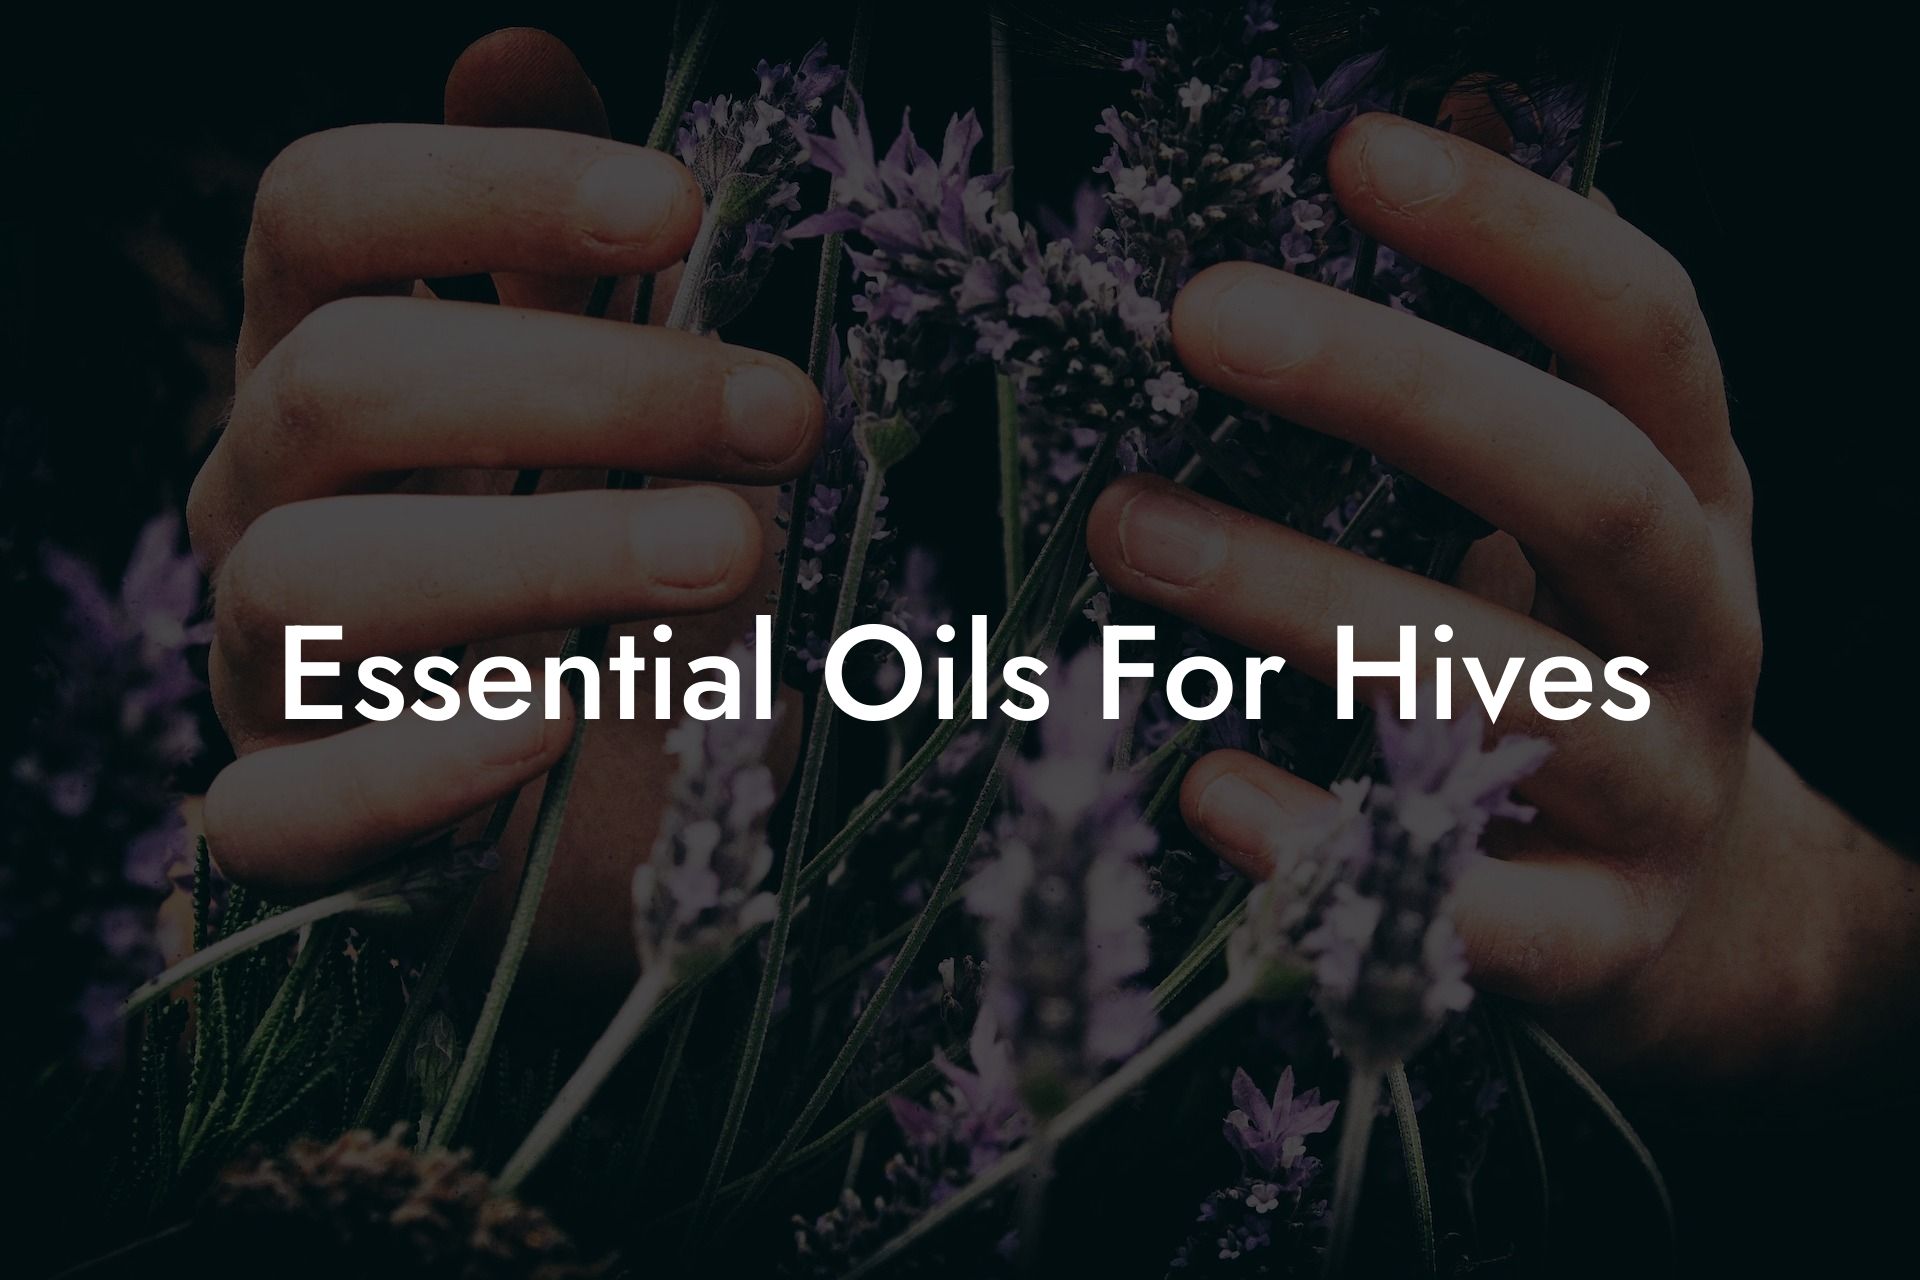 Essential Oils For Hives